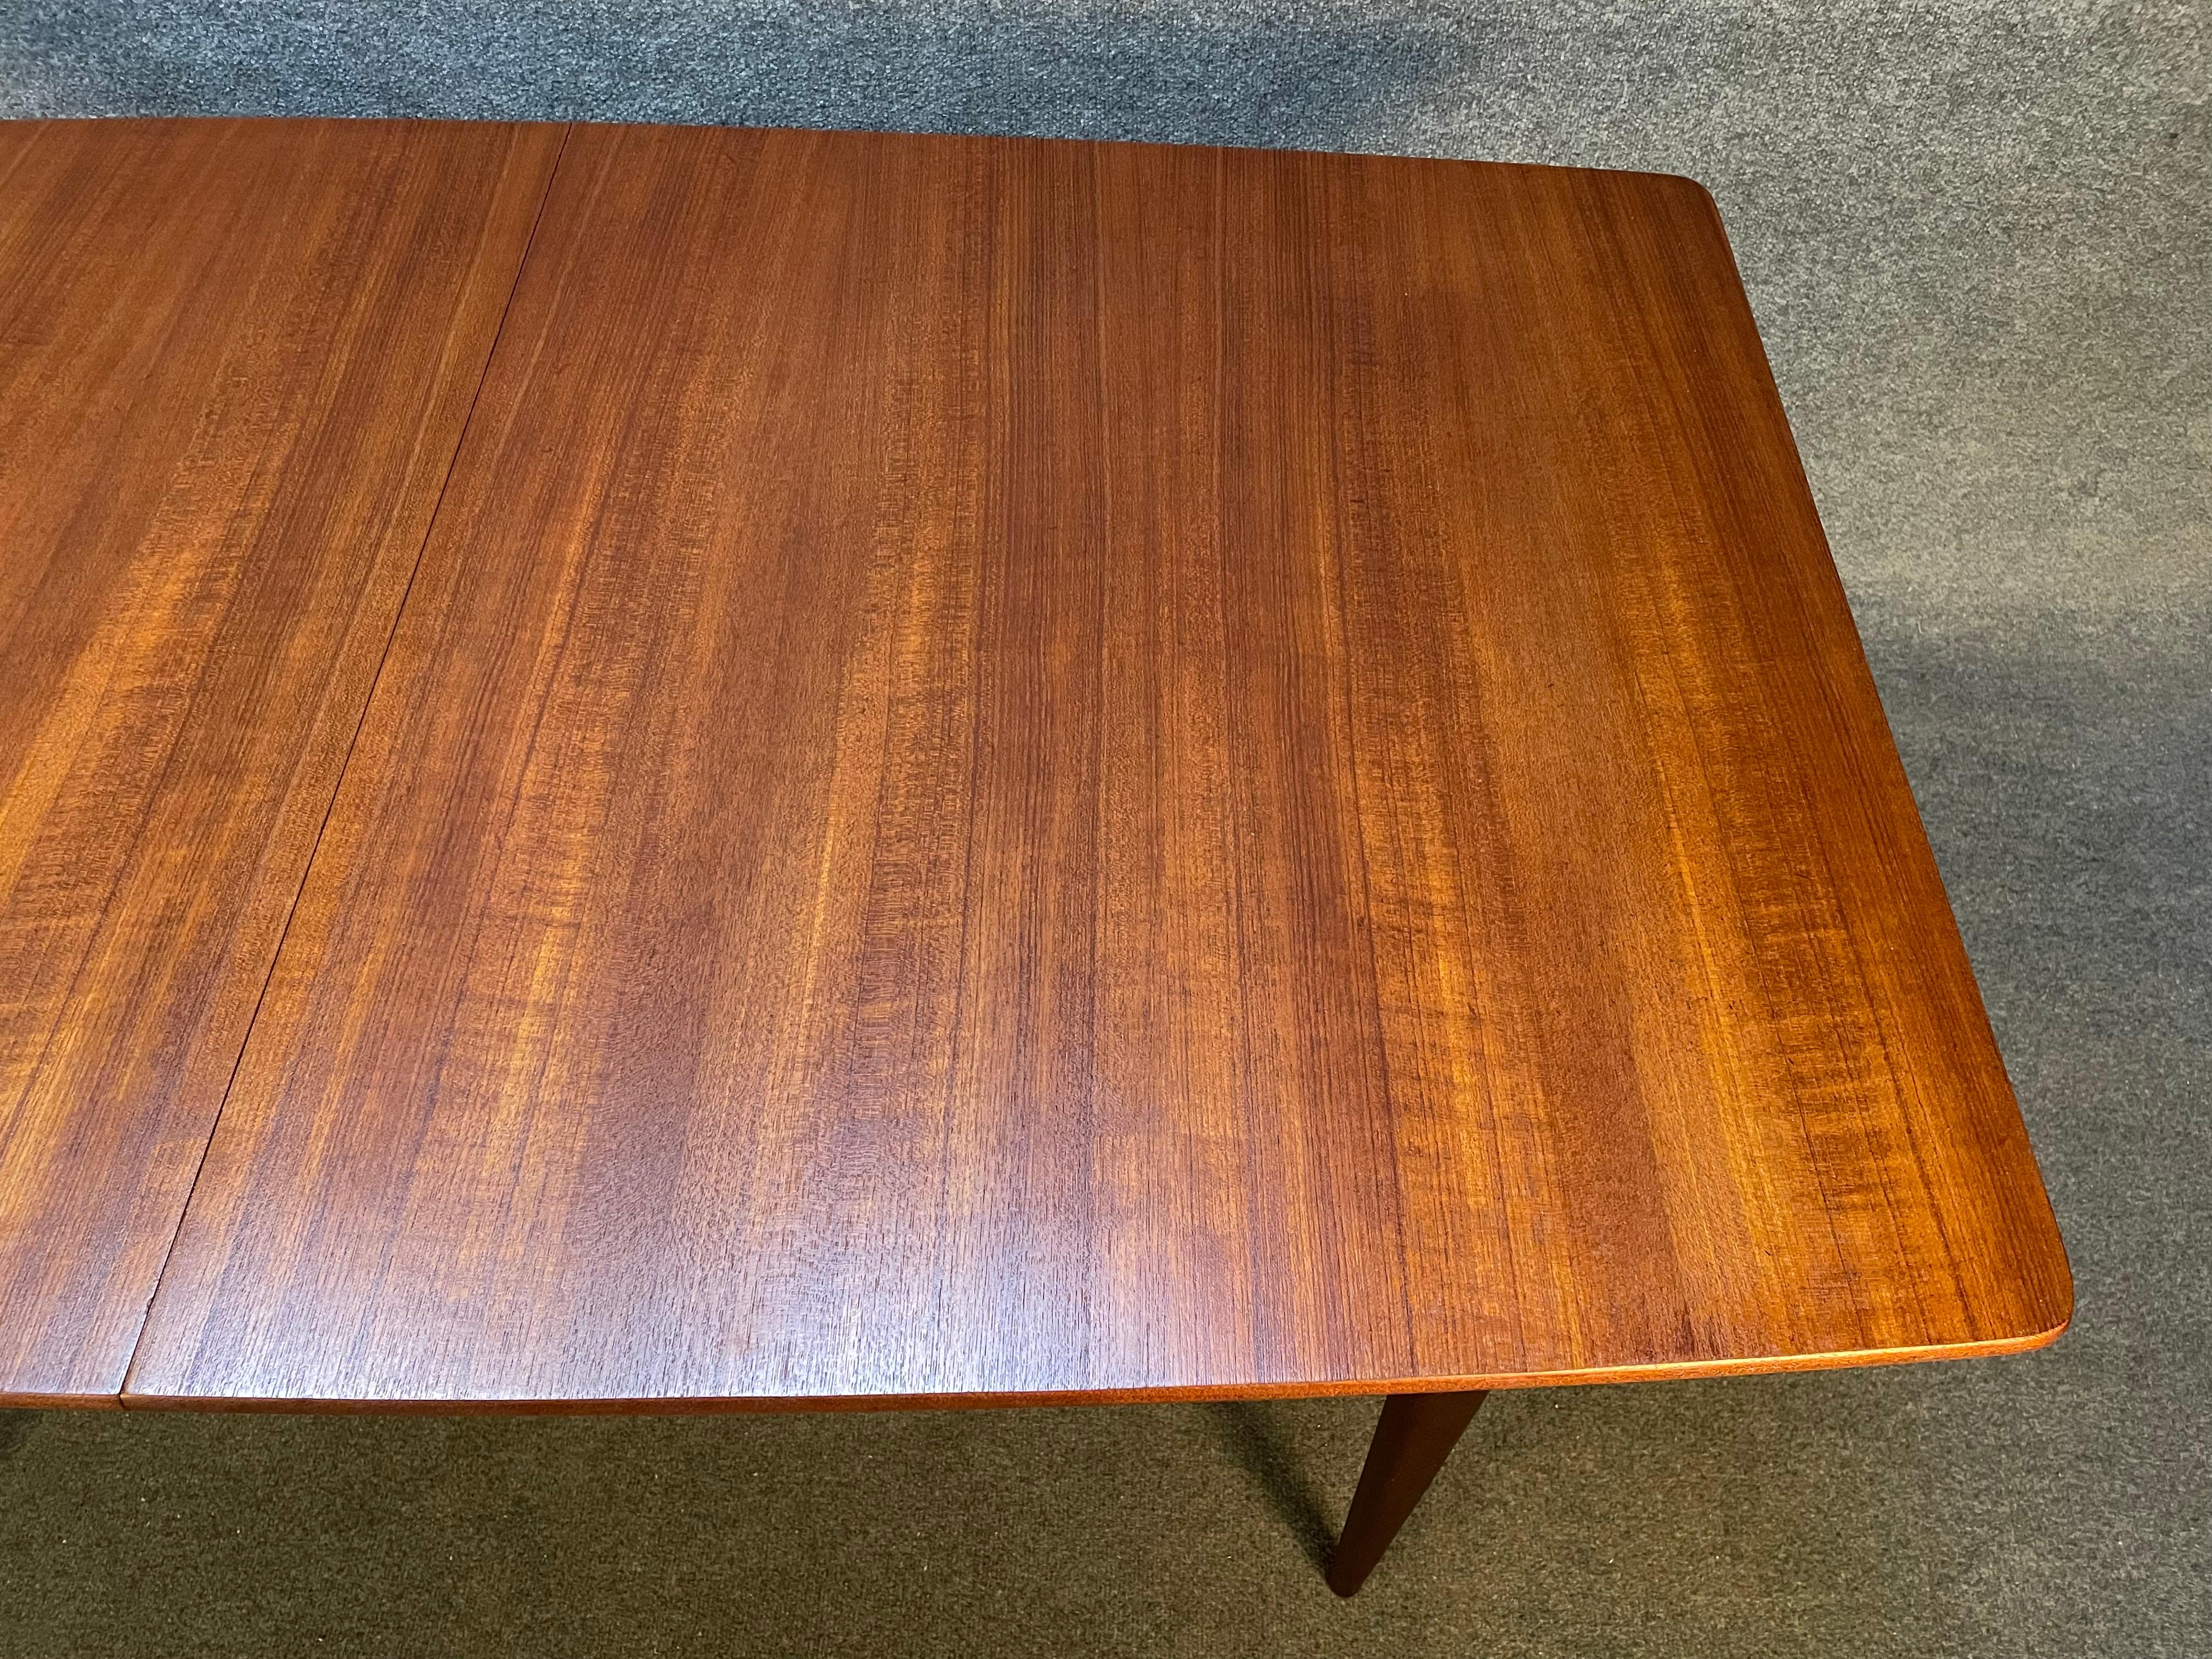 Here is a beautiful Mid-Century Modern dining table in teak wood manufcatured by A.H. McIntosh Ltd. in Scotkland in the 1960's.
This exquisite table, recently imported from Europe to California before its refinishing, features a vibrant wood grain,